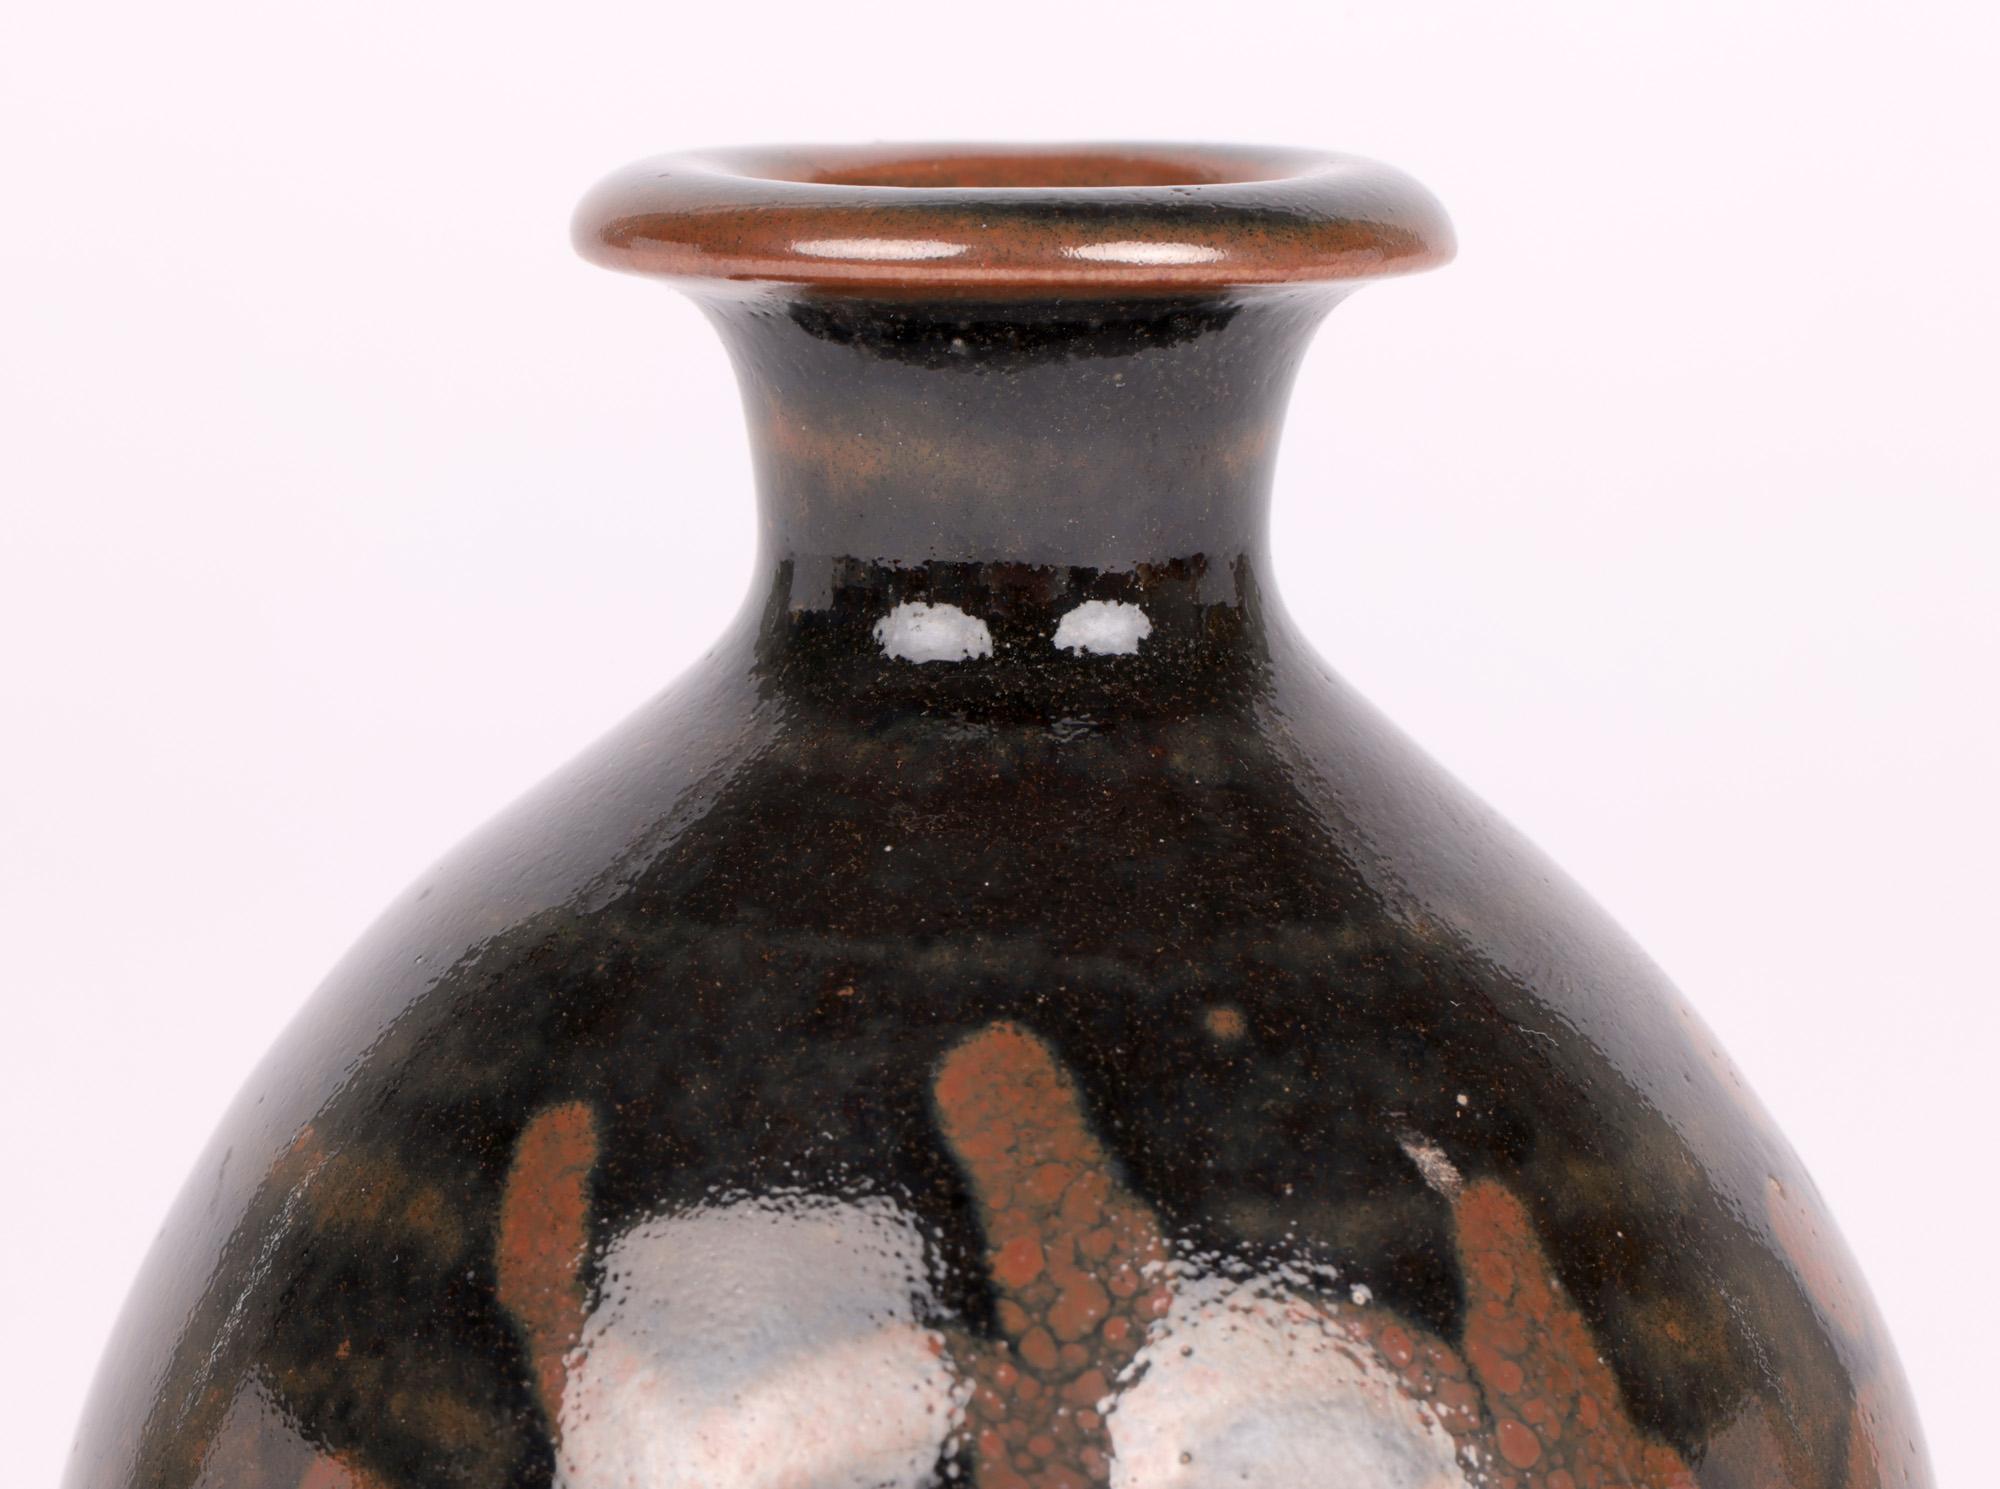 A very fine vintage handcrafted Studio Pottery miniature tenmoku glazed vase by renowned potter Atsuya Hamada (Japanese, 1932-1986) and made at the Leach Pottery in St Ives, Cornwall dating from around 1958. 

Richard Batterham (British, 1936 –